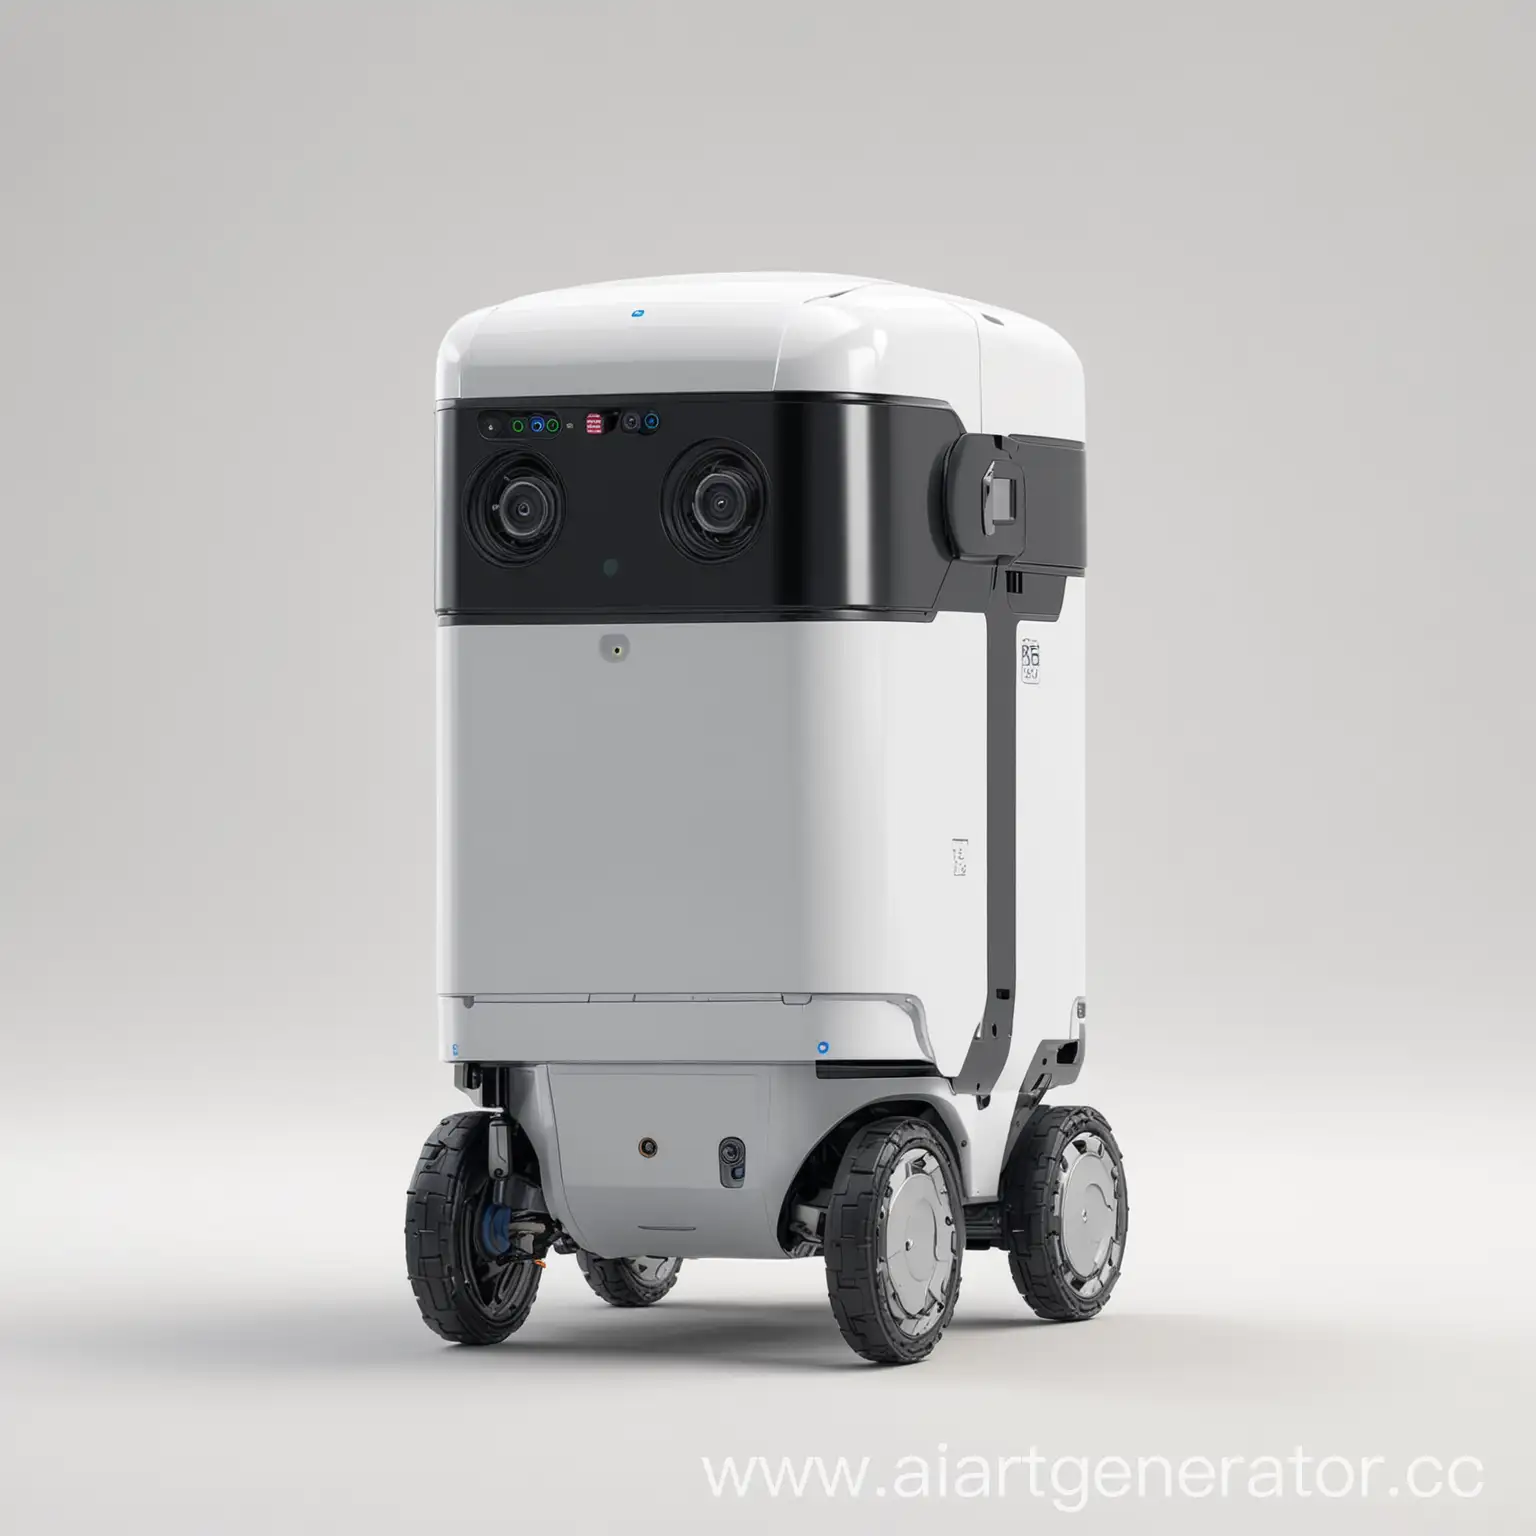 Compact-Square-Food-Delivery-Robot-on-White-Background